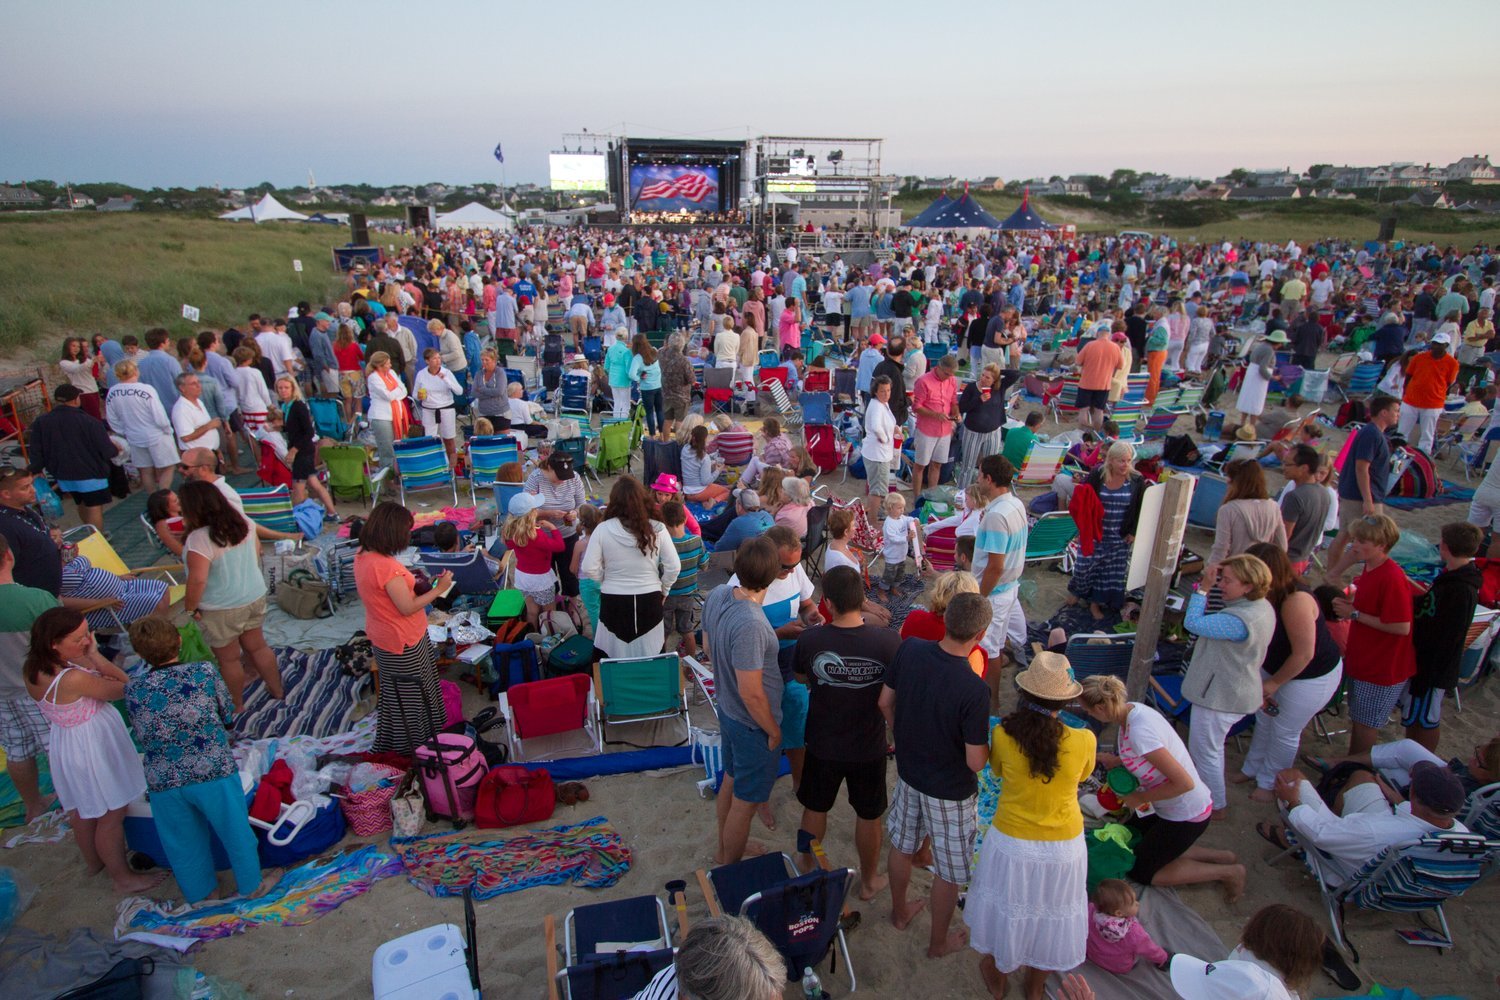 New rules have been put in place for what can be brought to Saturday's Boston Pops concert at Jetties Beach to help ensure public safety.